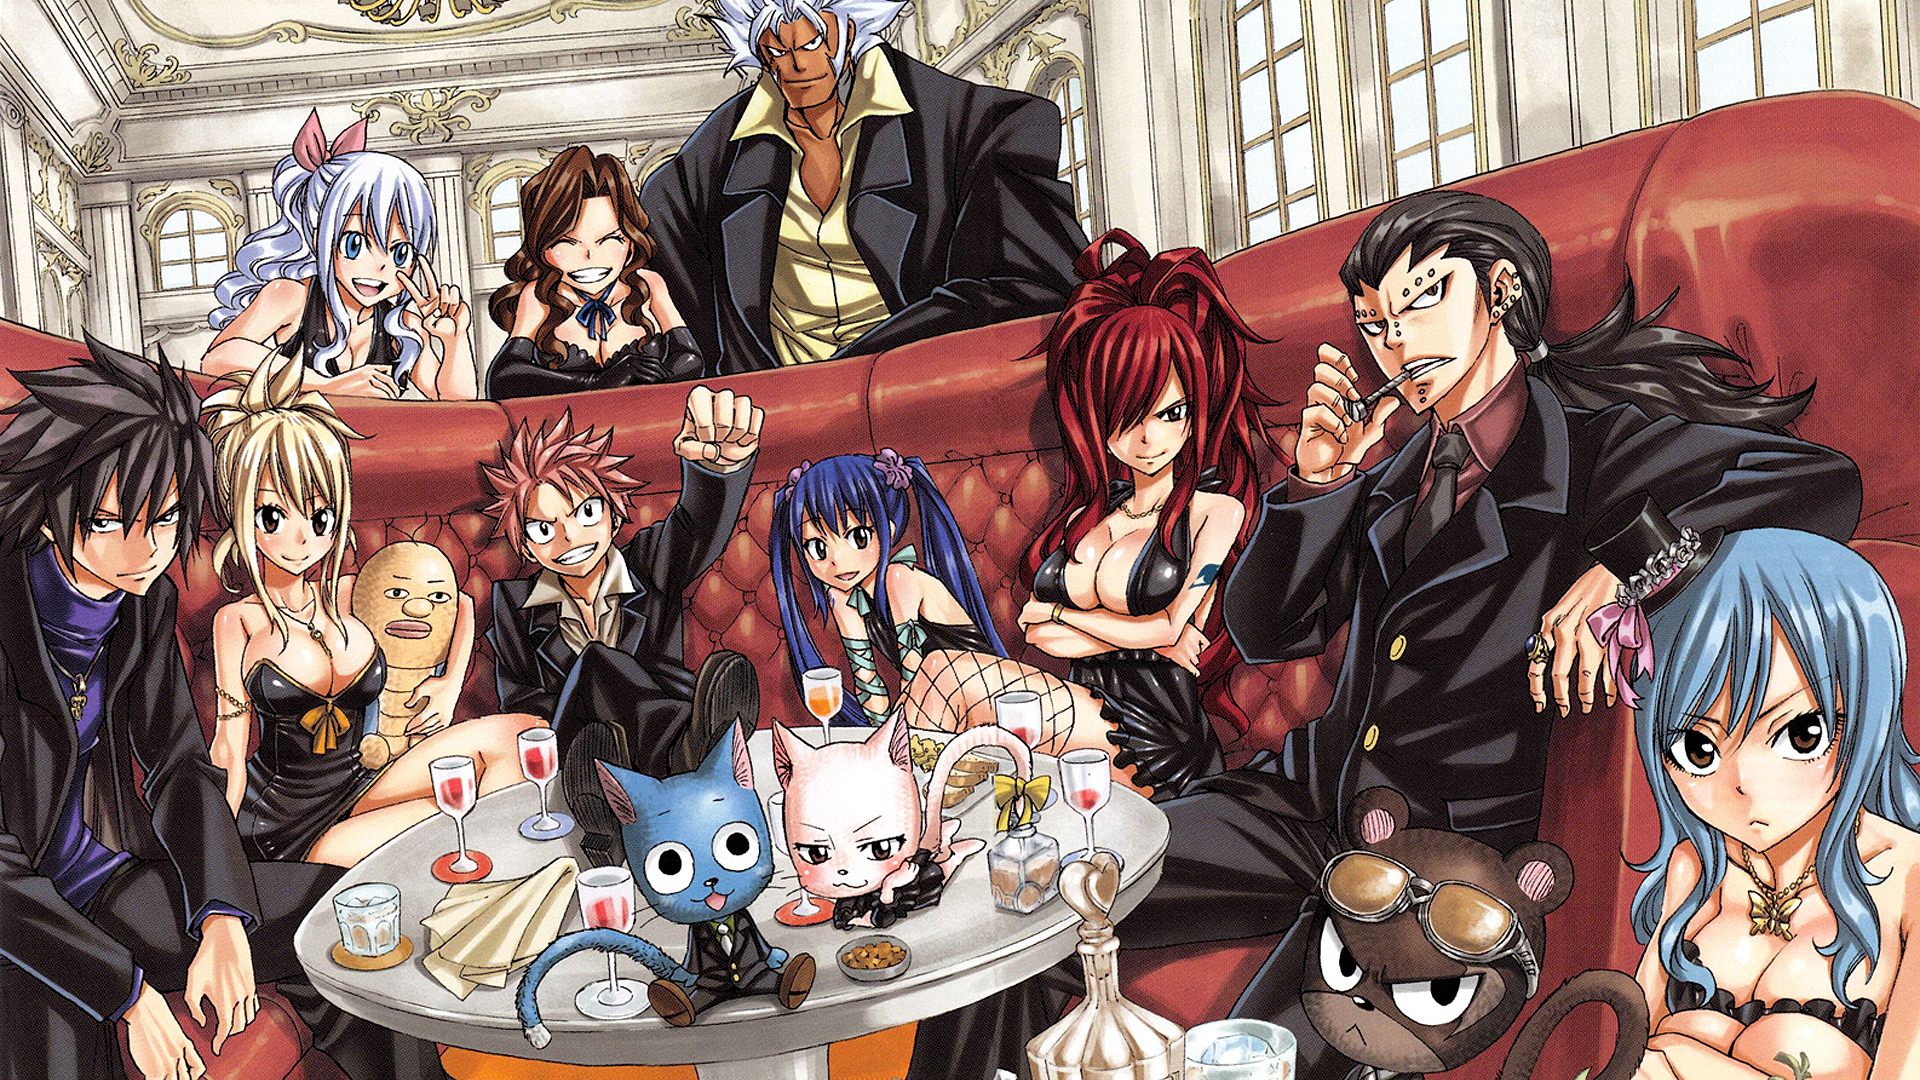 Fairy Tail Natsu Dragneel Lucy Heartfilia Happy Fairy Tail Erza Scarlet Wendy Marvell Gray Fullbuste 1920x1080